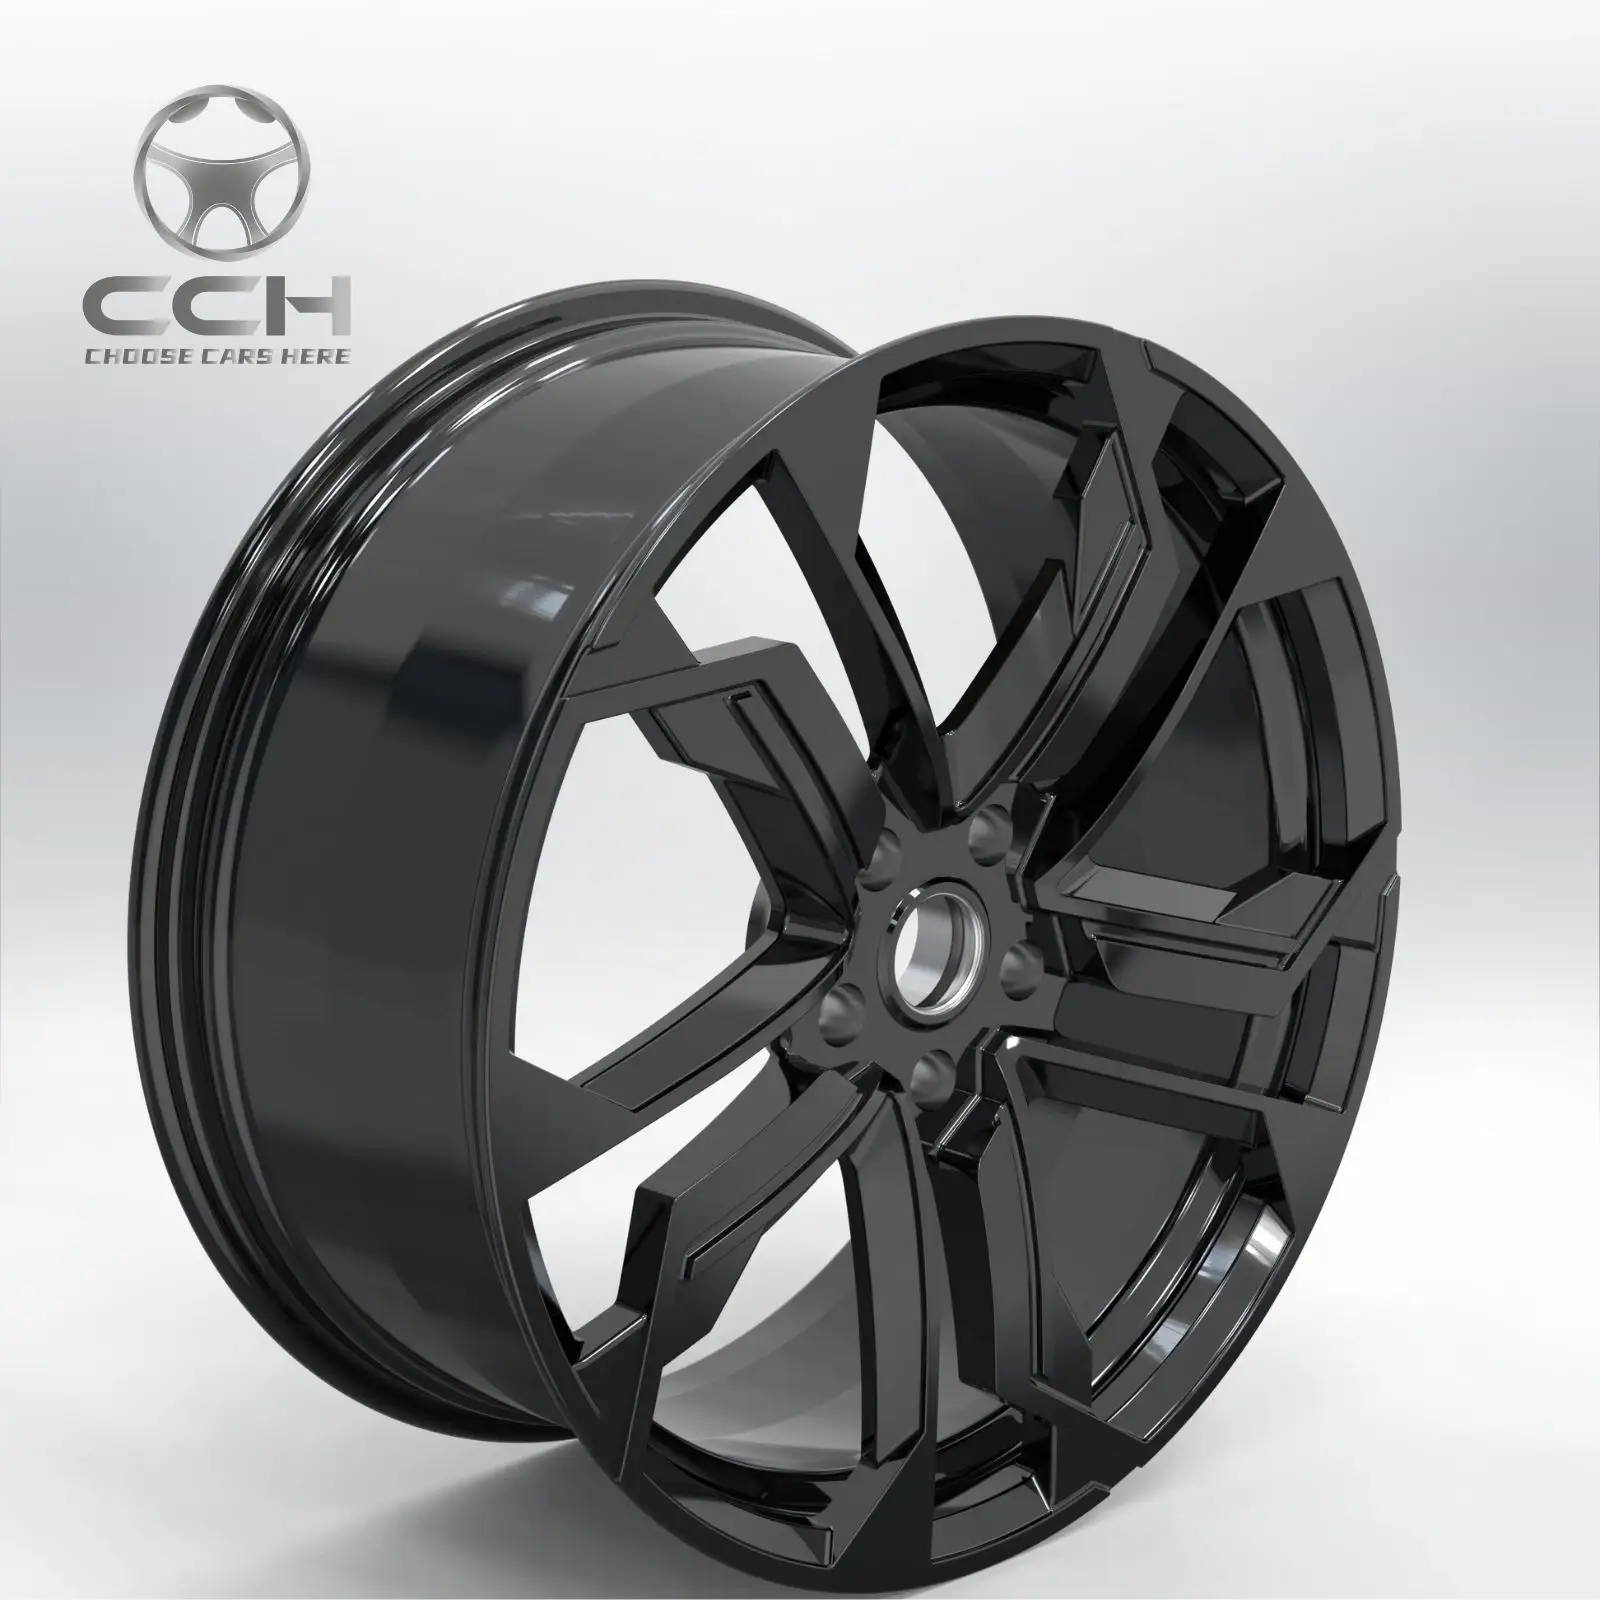 Luxury Forged Chrome Alloy Wheels 275/40R 22 5X108 5X1143 16-24 Inch for New Energy Vehicles Car Rims 18 5X120